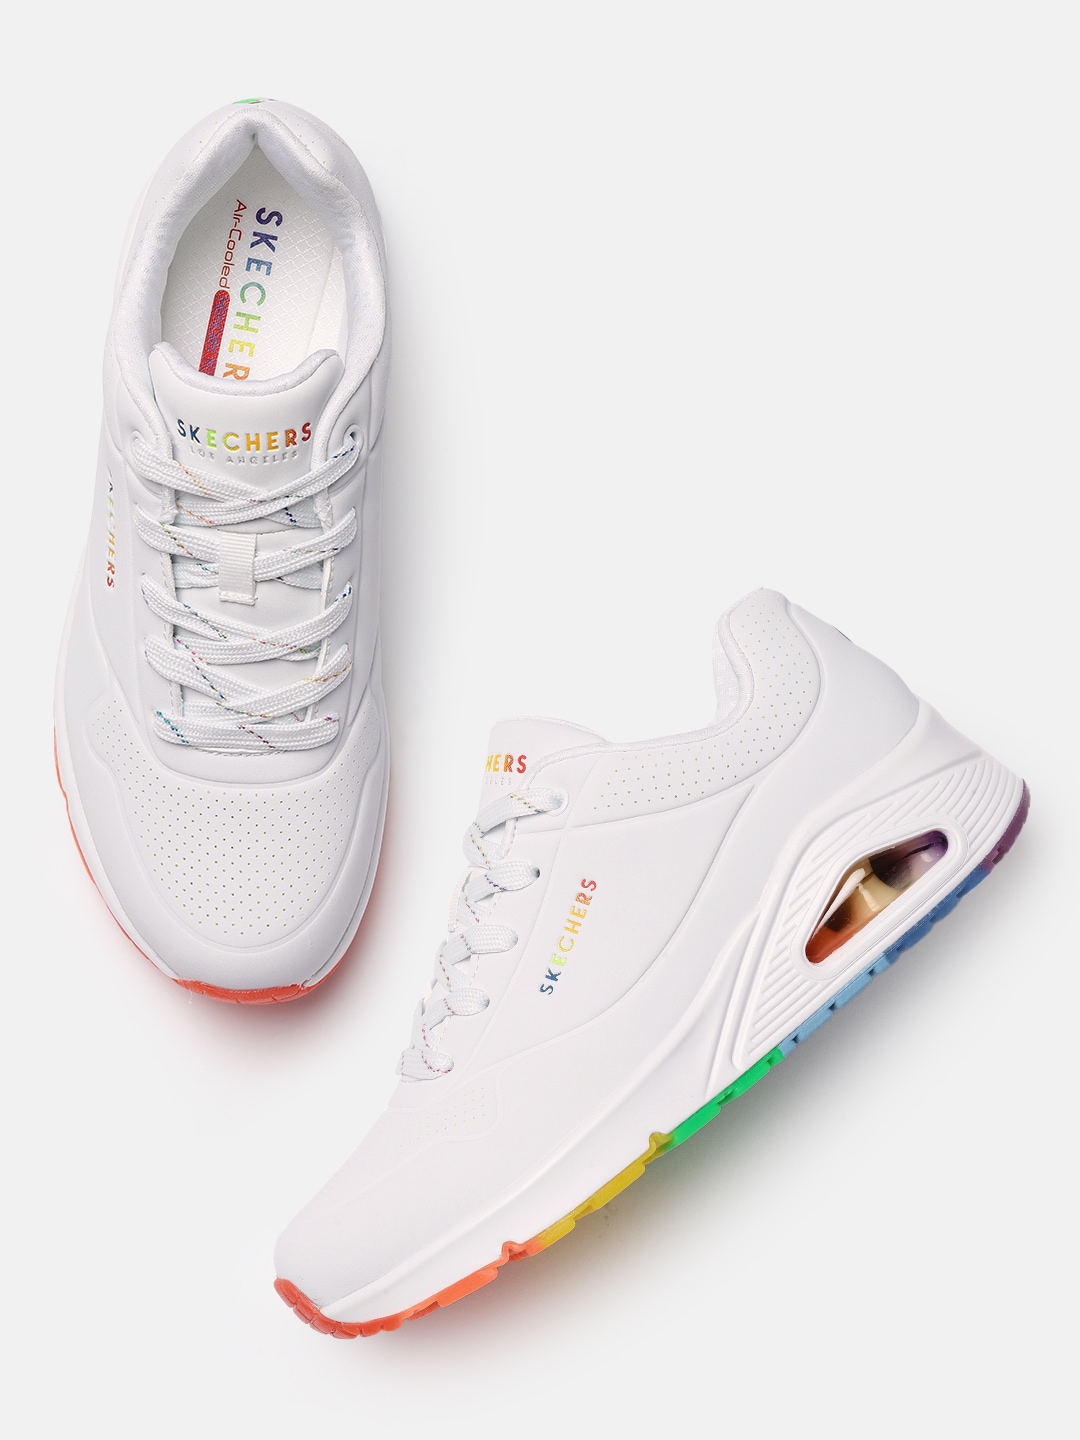 Skechers Women White Solid Uno Rainbow Peaks Regular Sneakers with Perforations Detail Price in India